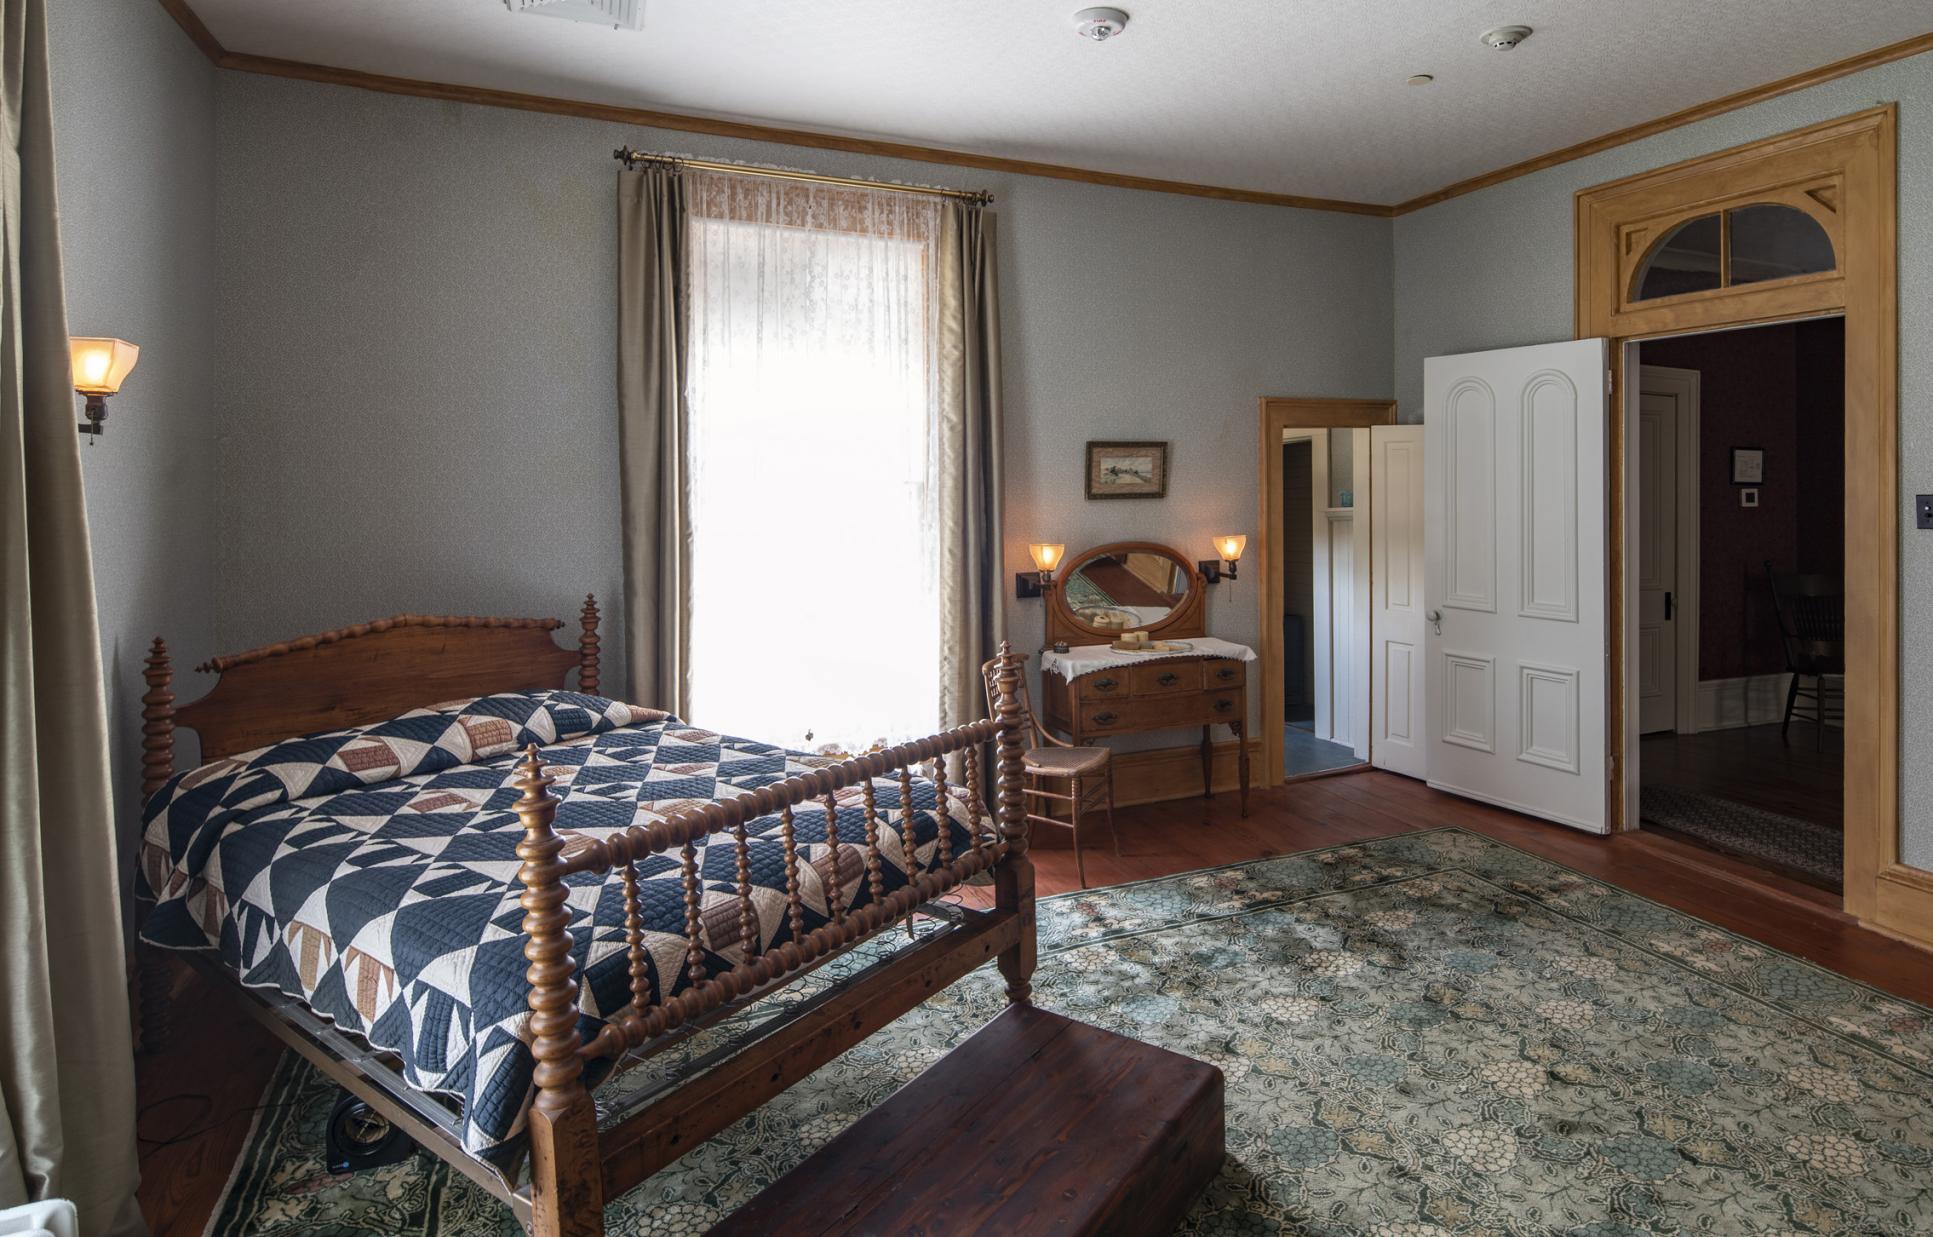 Upstairs bedroom inside the Sam Bell Maxey House